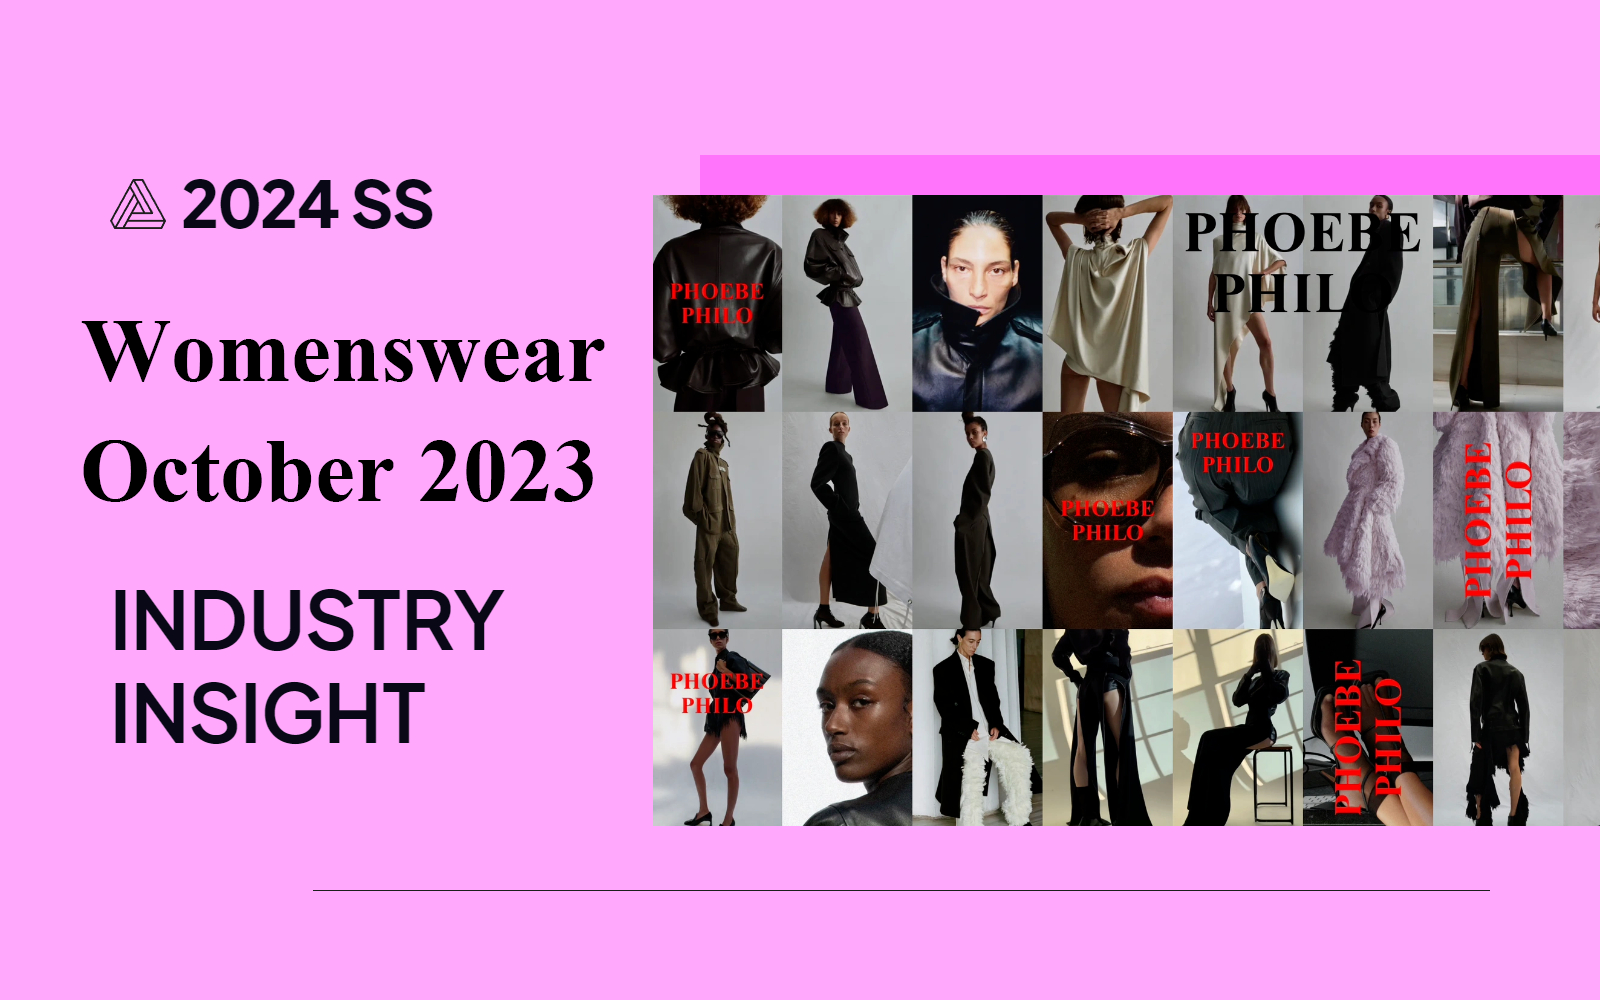 October 2023 -- The Industry Insight of Womenswear